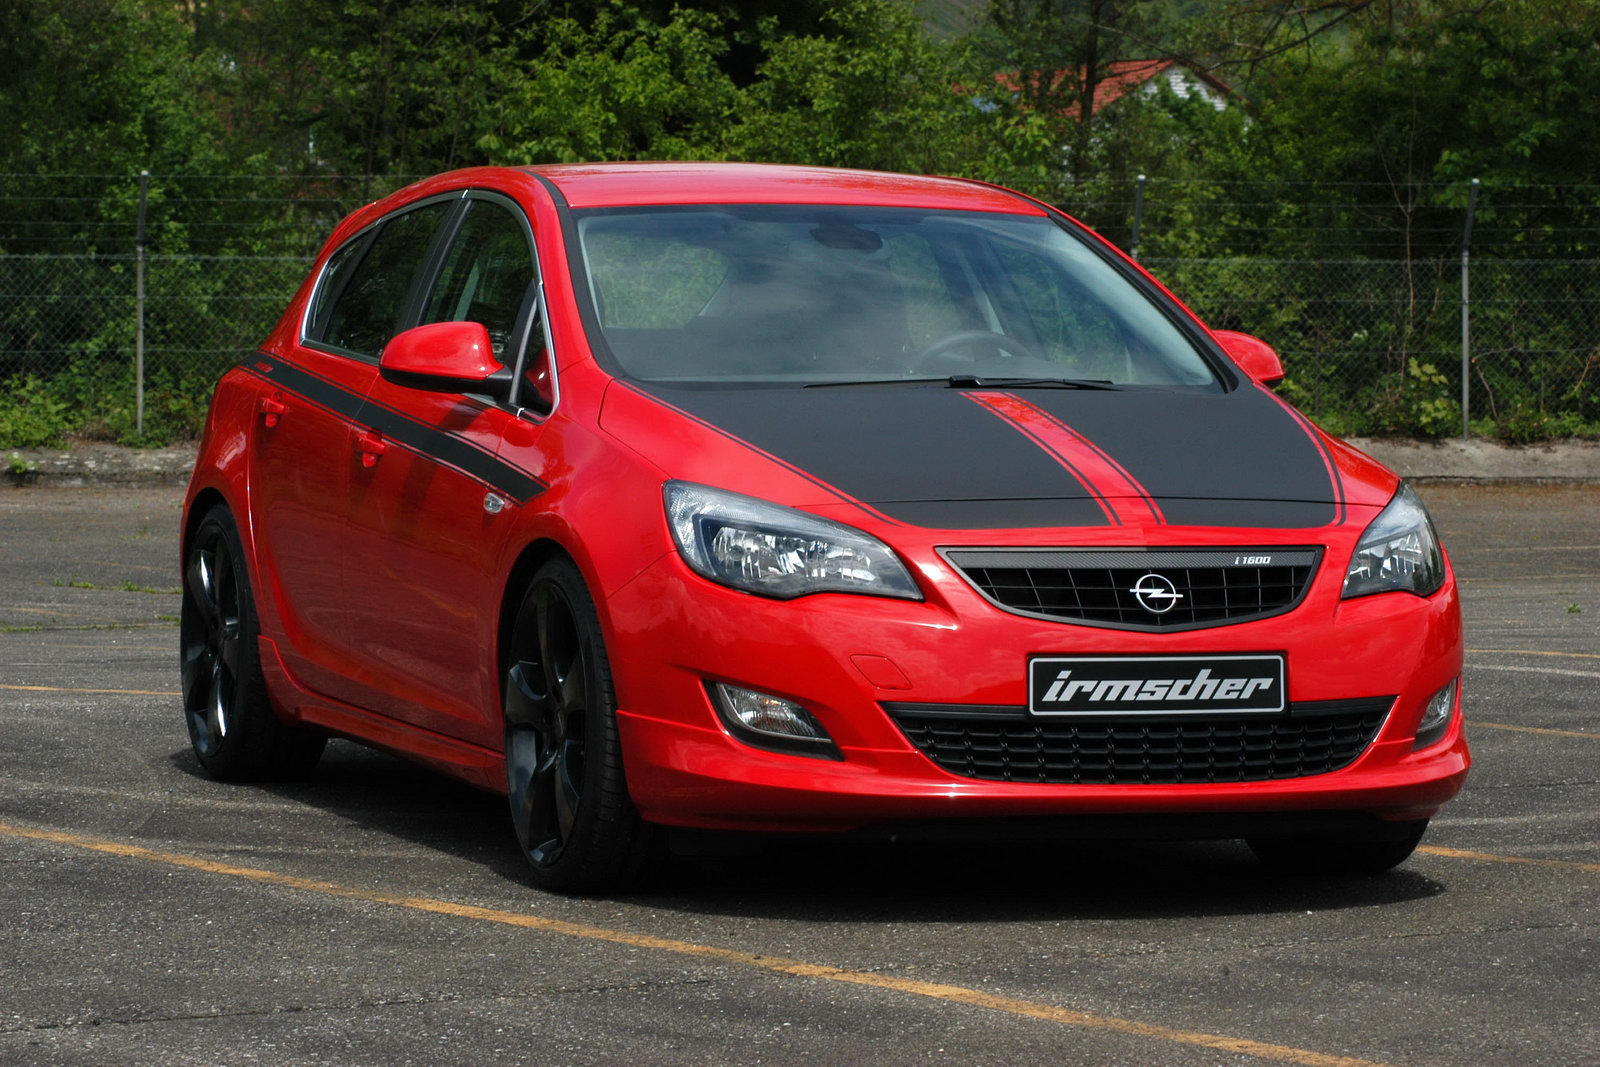 Irmscher Opel Astra i1600 with Upgraded 200HP 1.6-liter Turbo